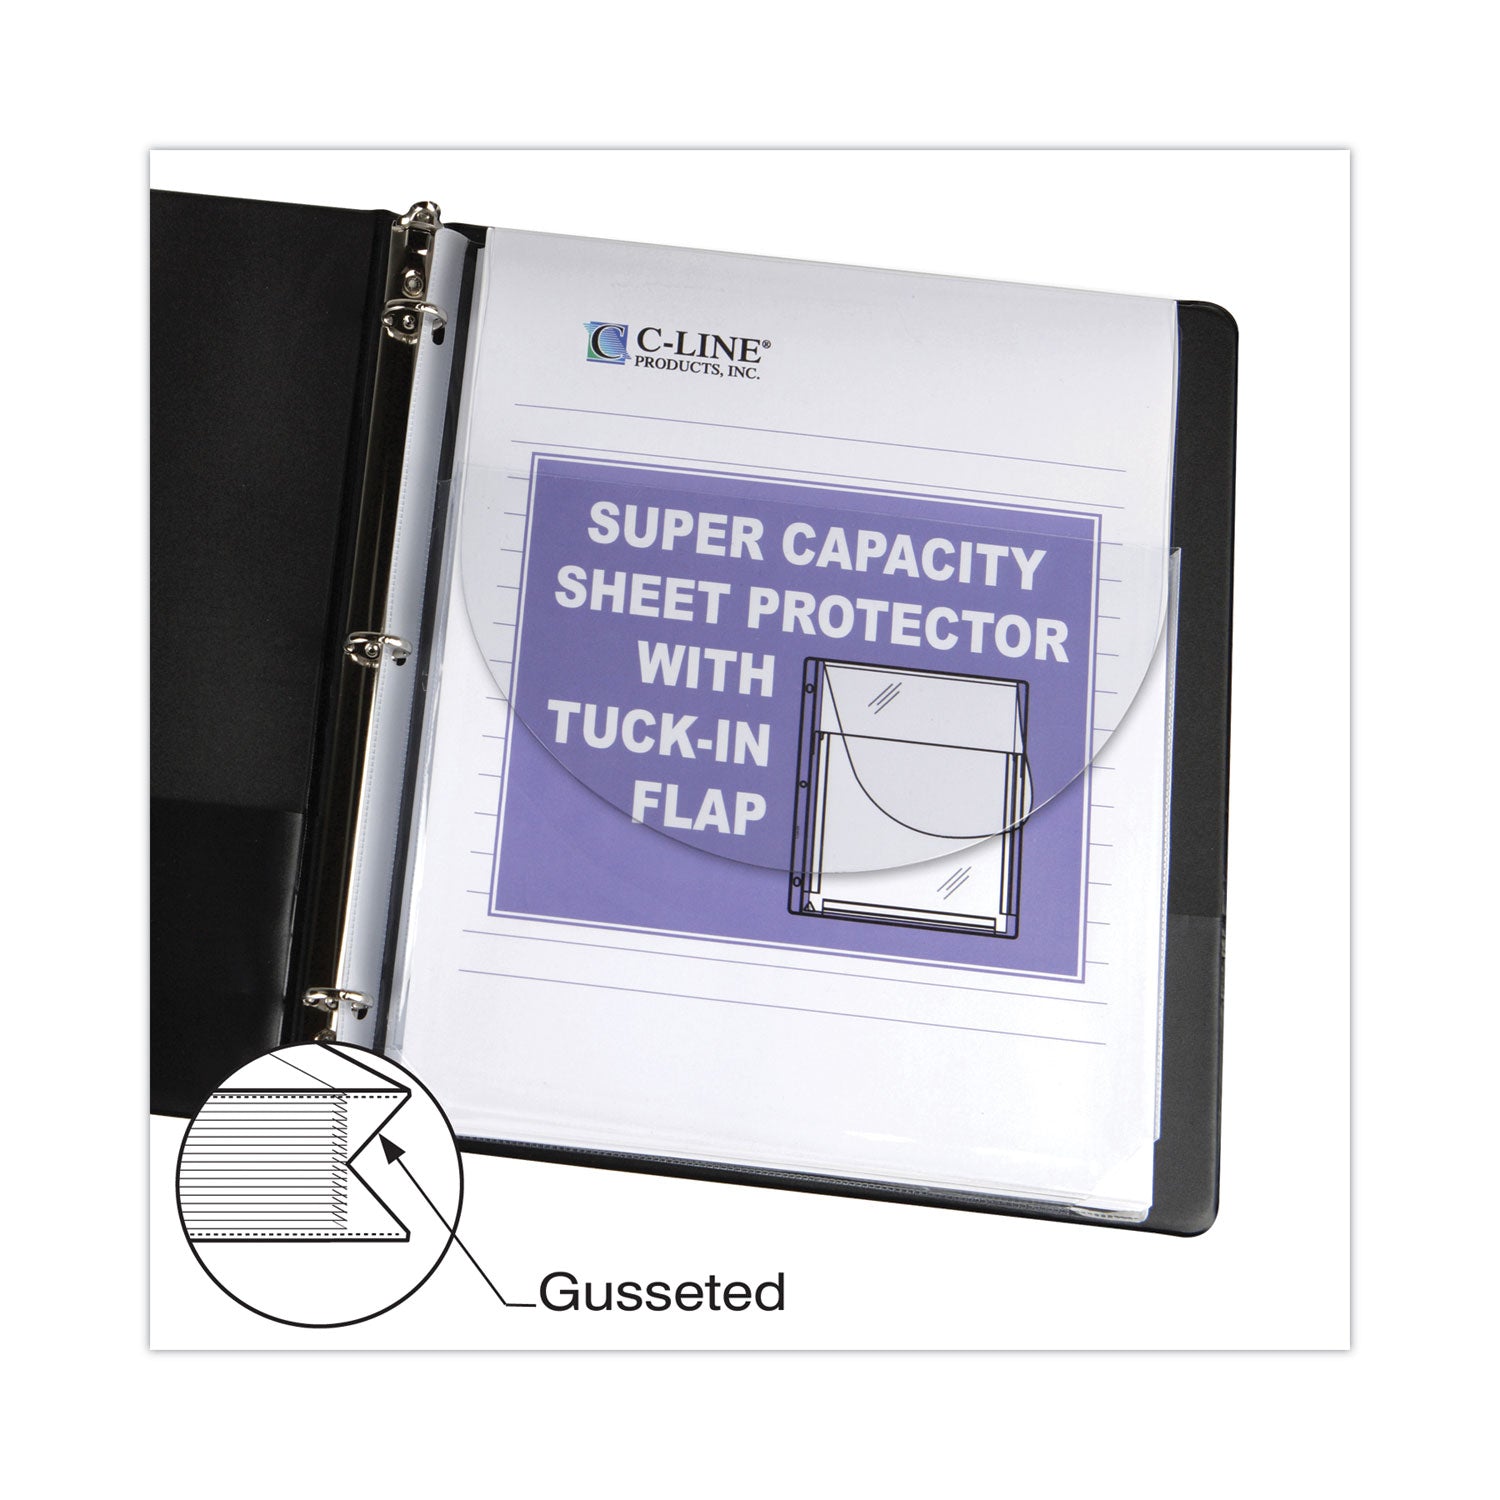 Super Capacity Sheet Protectors with Tuck-In Flap, 200", Letter Size, 10/Pack - 